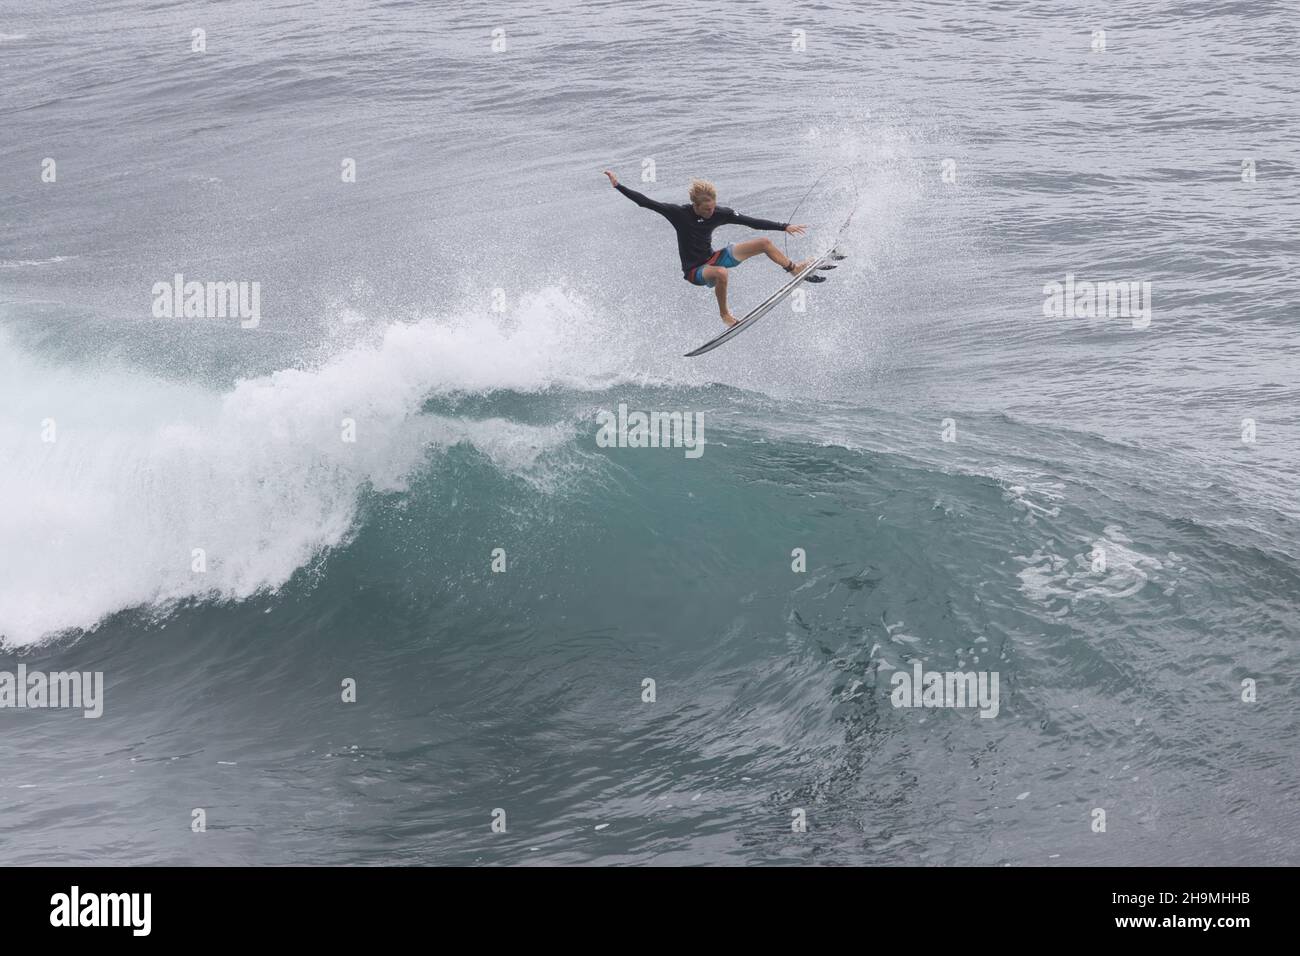 Unrecognizable,arobatic surfer getting airborne riding a big wave on Maui. Stock Photo